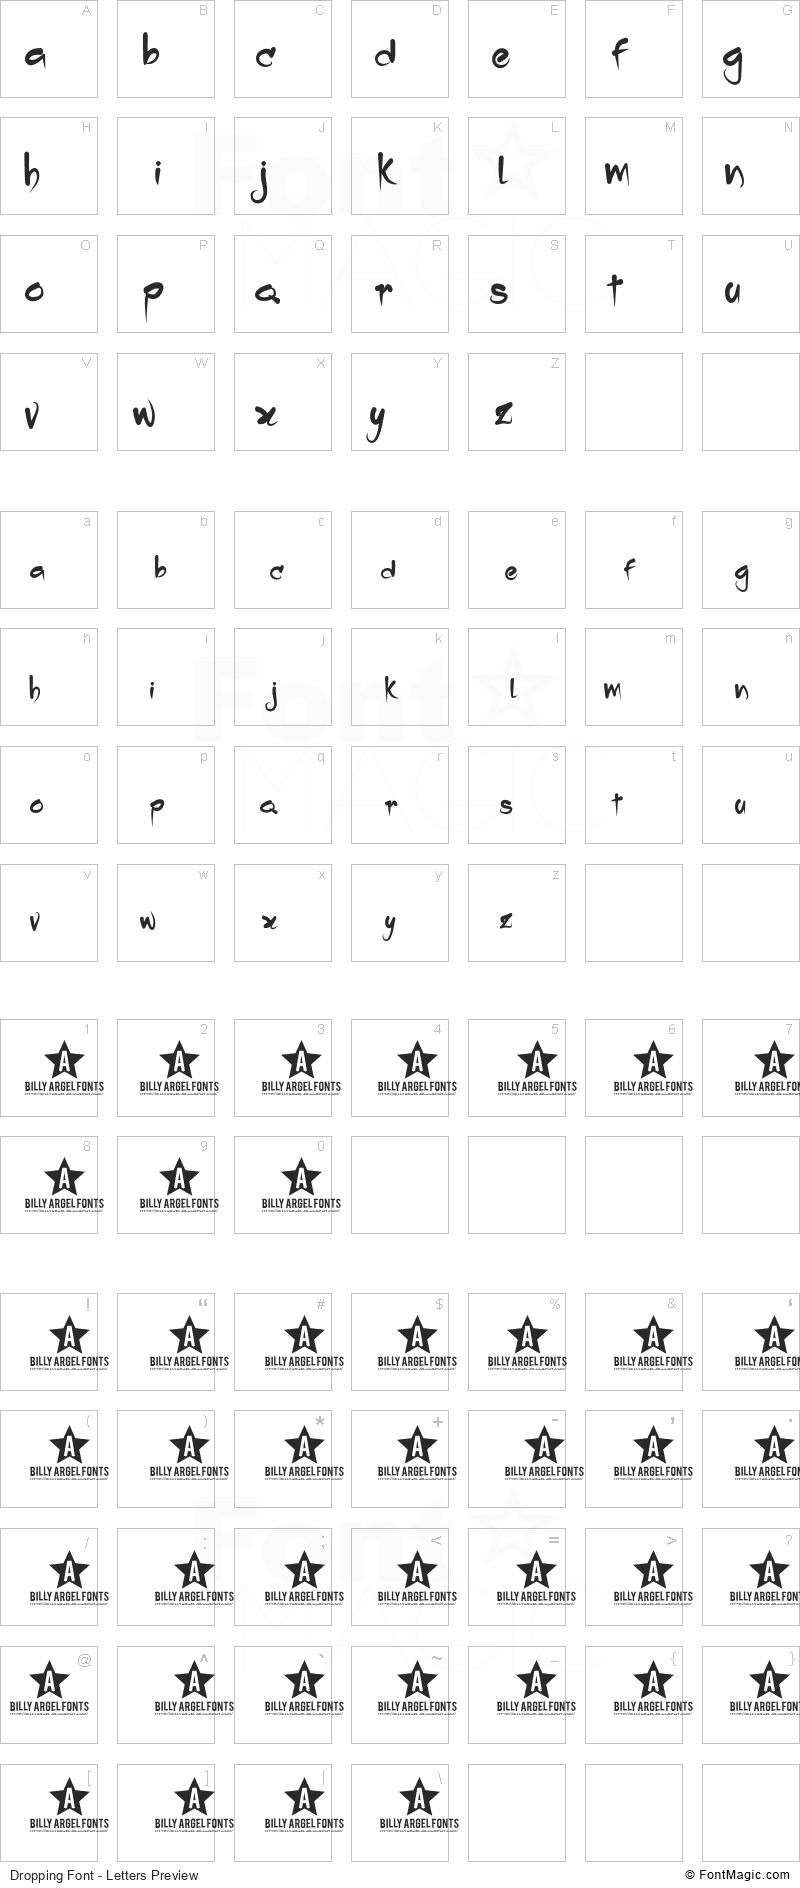 Dropping Font - All Latters Preview Chart